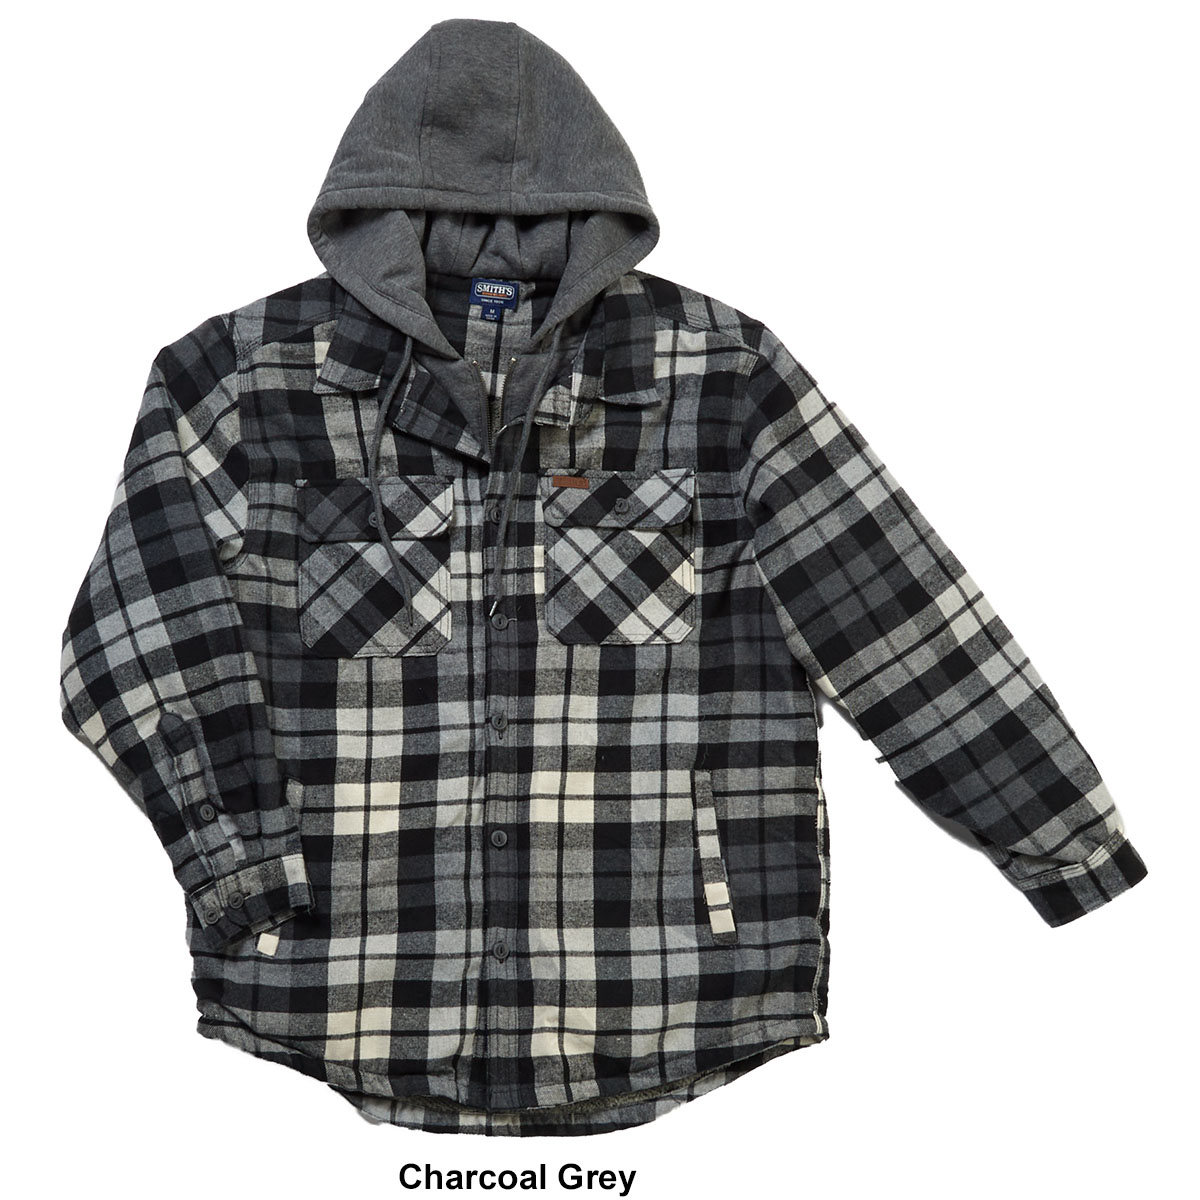 Mens Smith's Sherpa Lined Flannel Shirt Jacket